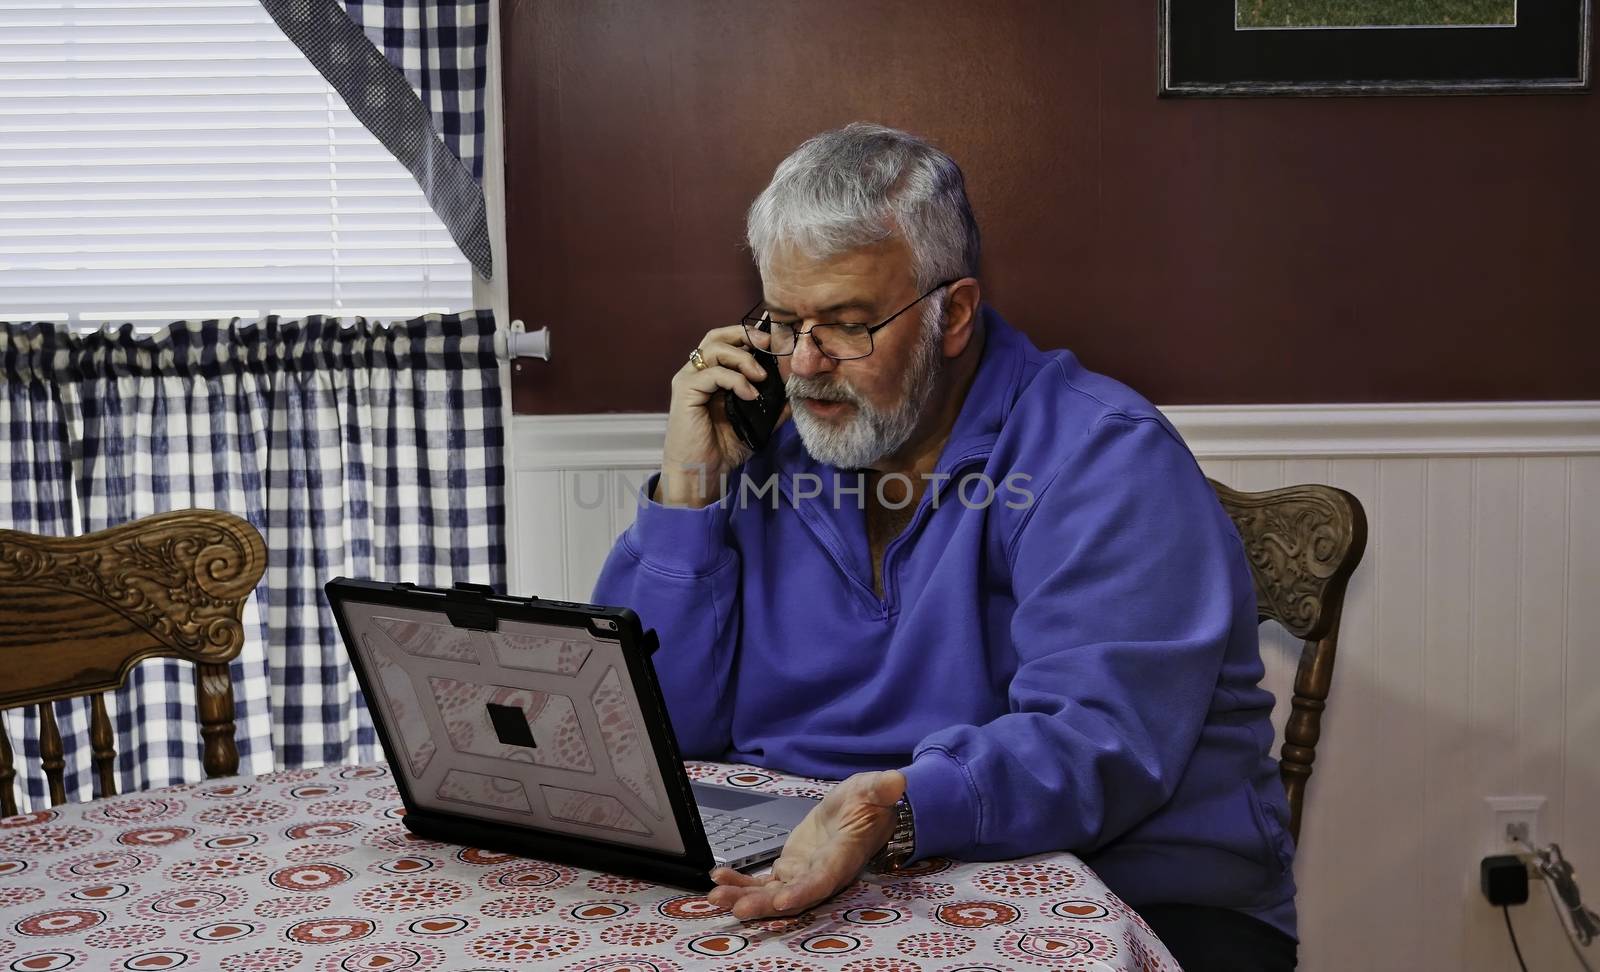 Senior Citizen Upset and Mad at Using a Computer and Tech Support by actionphoto50